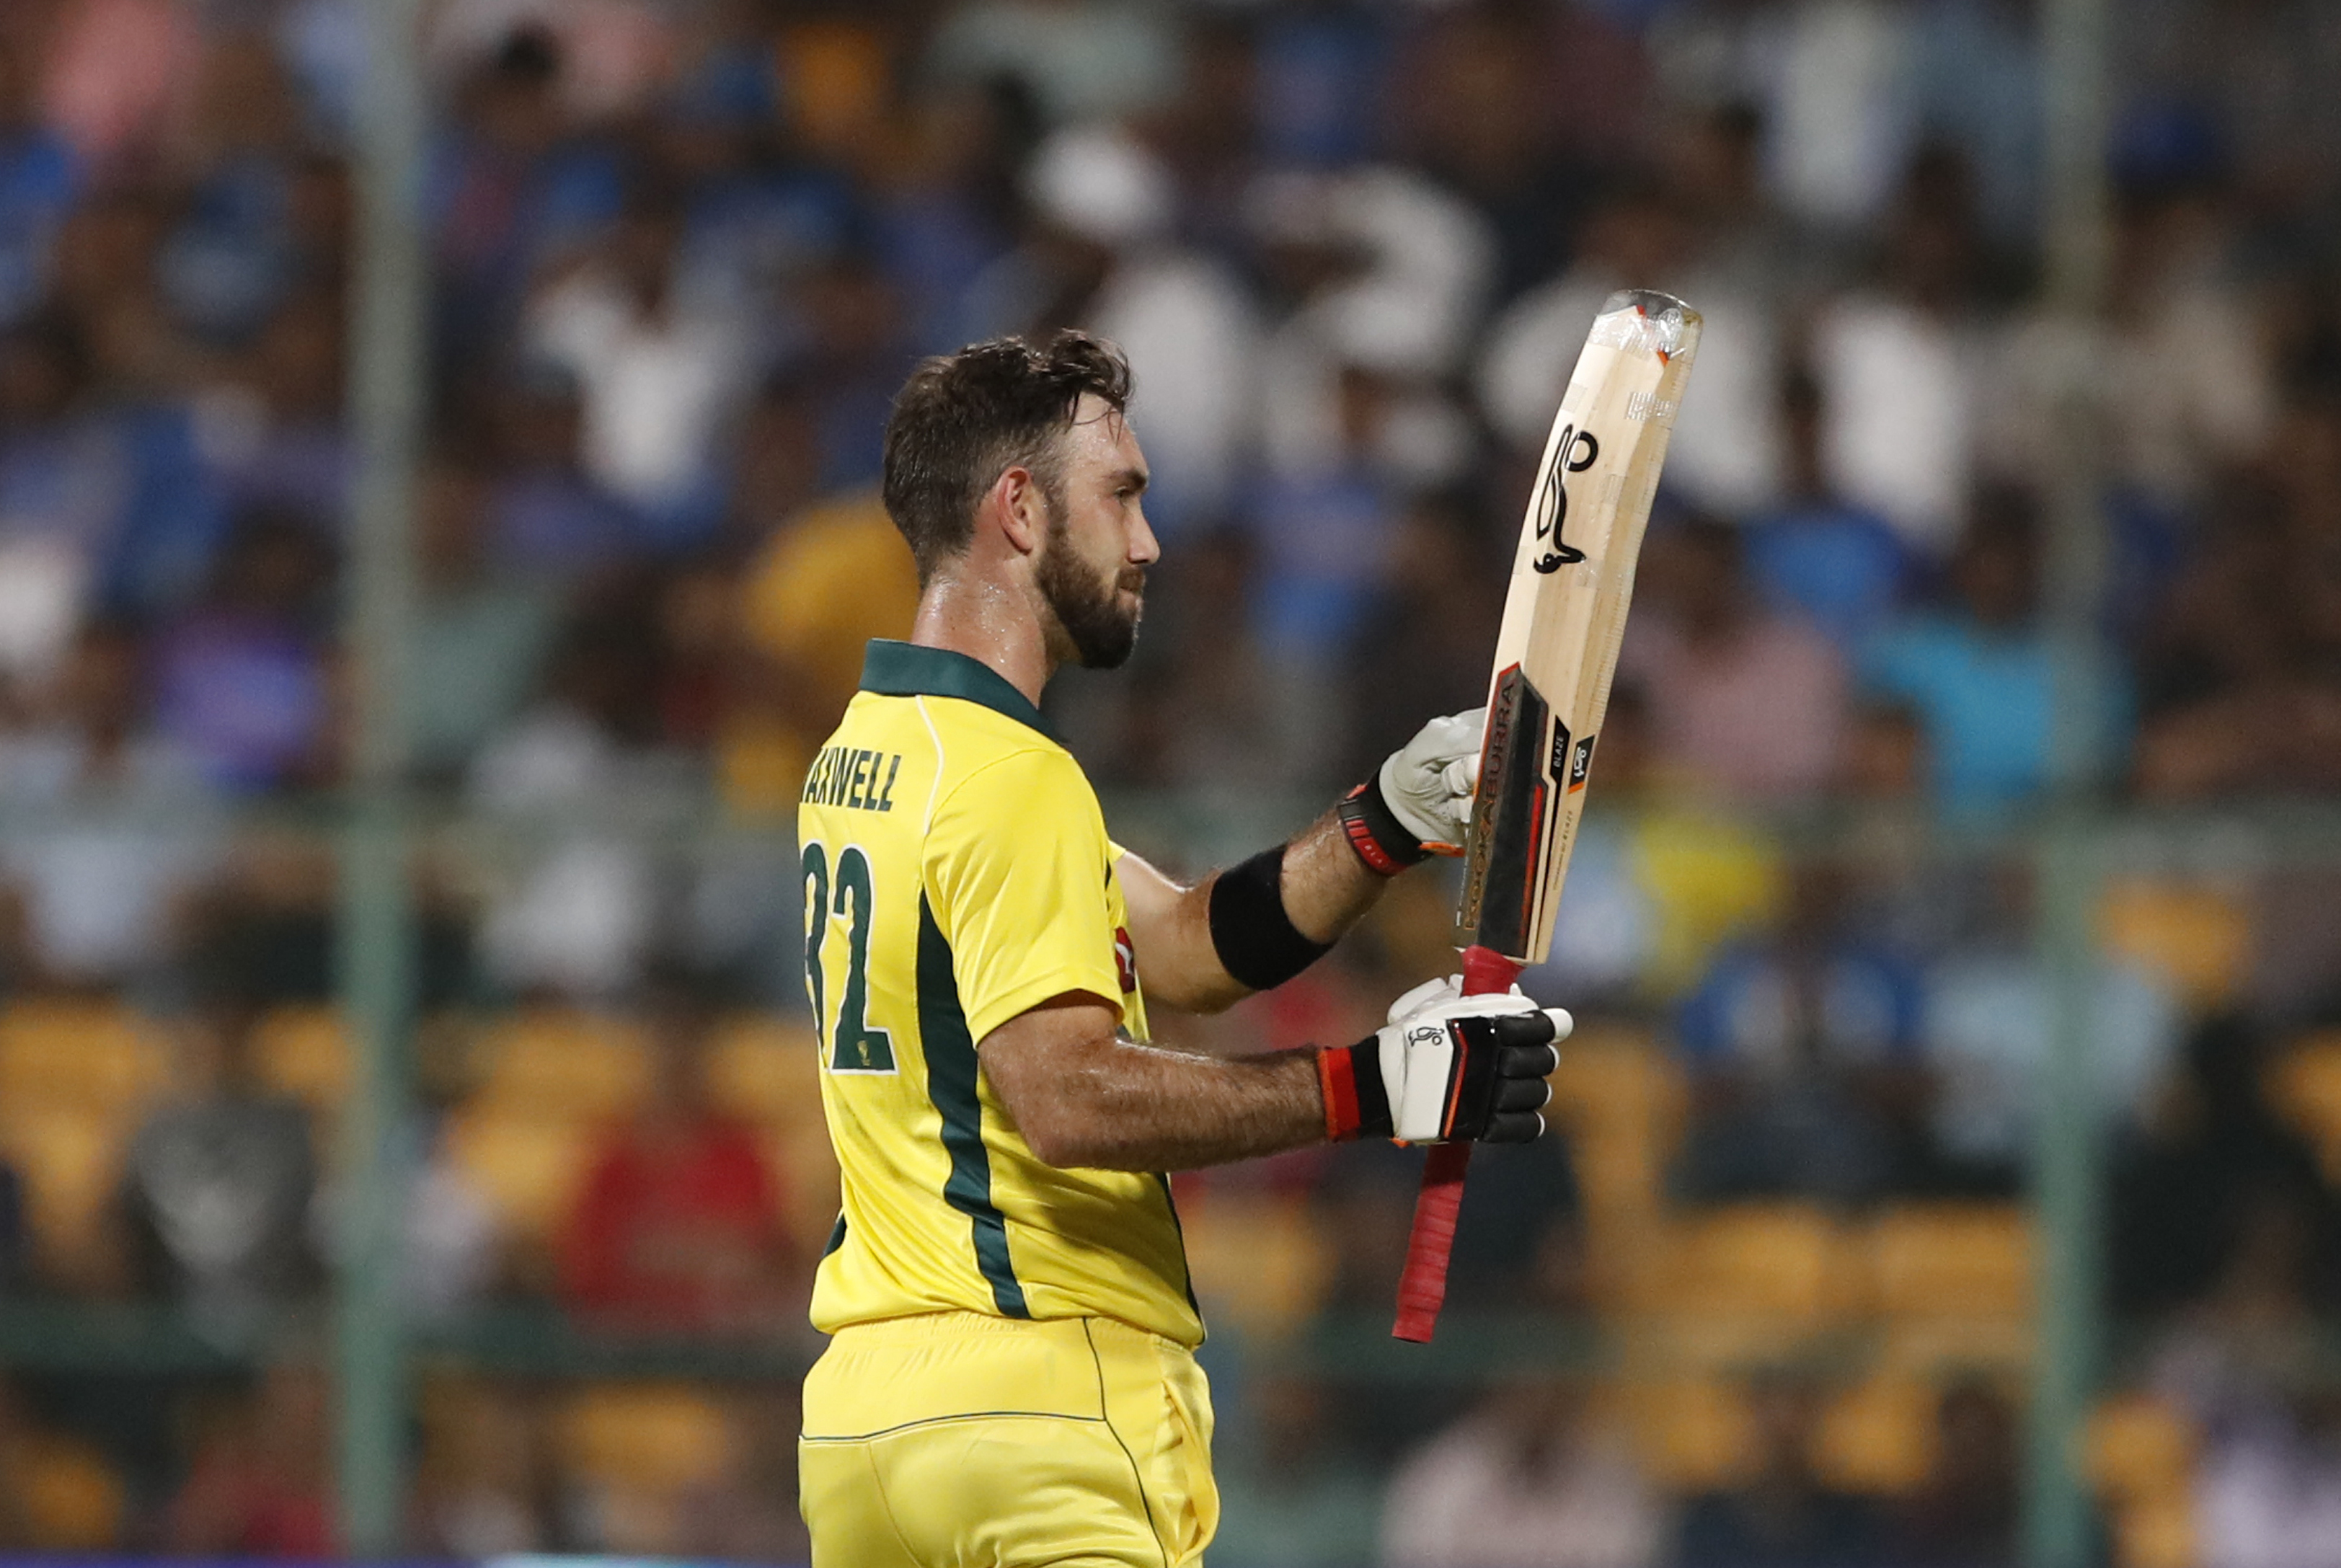 Australia's Glenn Maxwell gestures towards his team dugout after scoring fifty runs during the second T20 international cricket match between India and Australia in Bangalore - AP